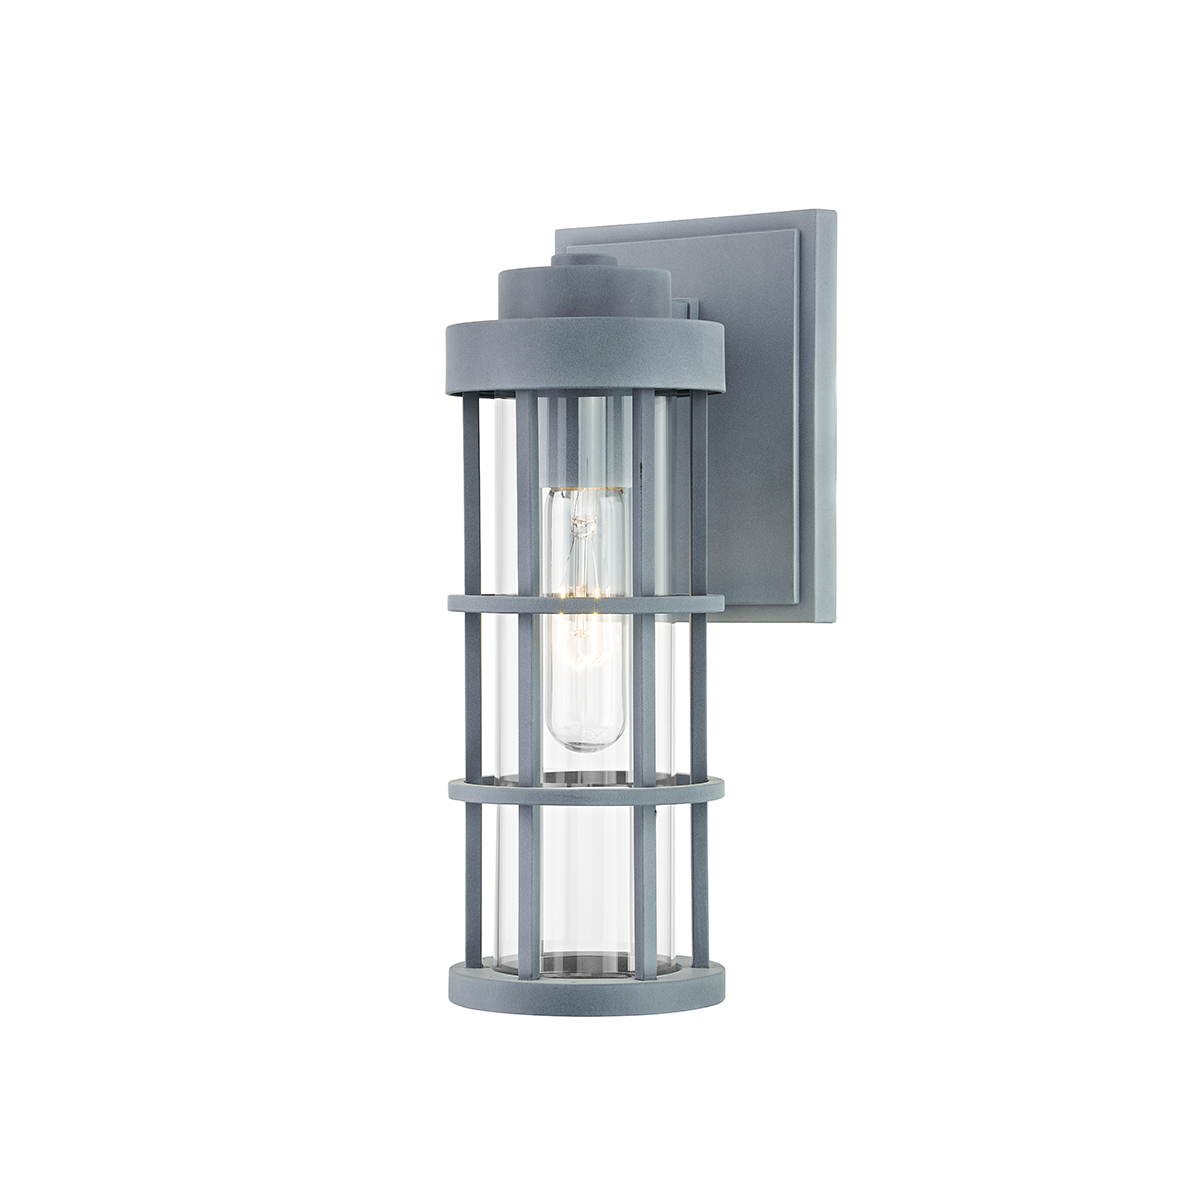 Troy MESA 1 LIGHT SMALL EXTERIOR WALL SCONCE B2041 Outdoor l Wall Troy Lighting   